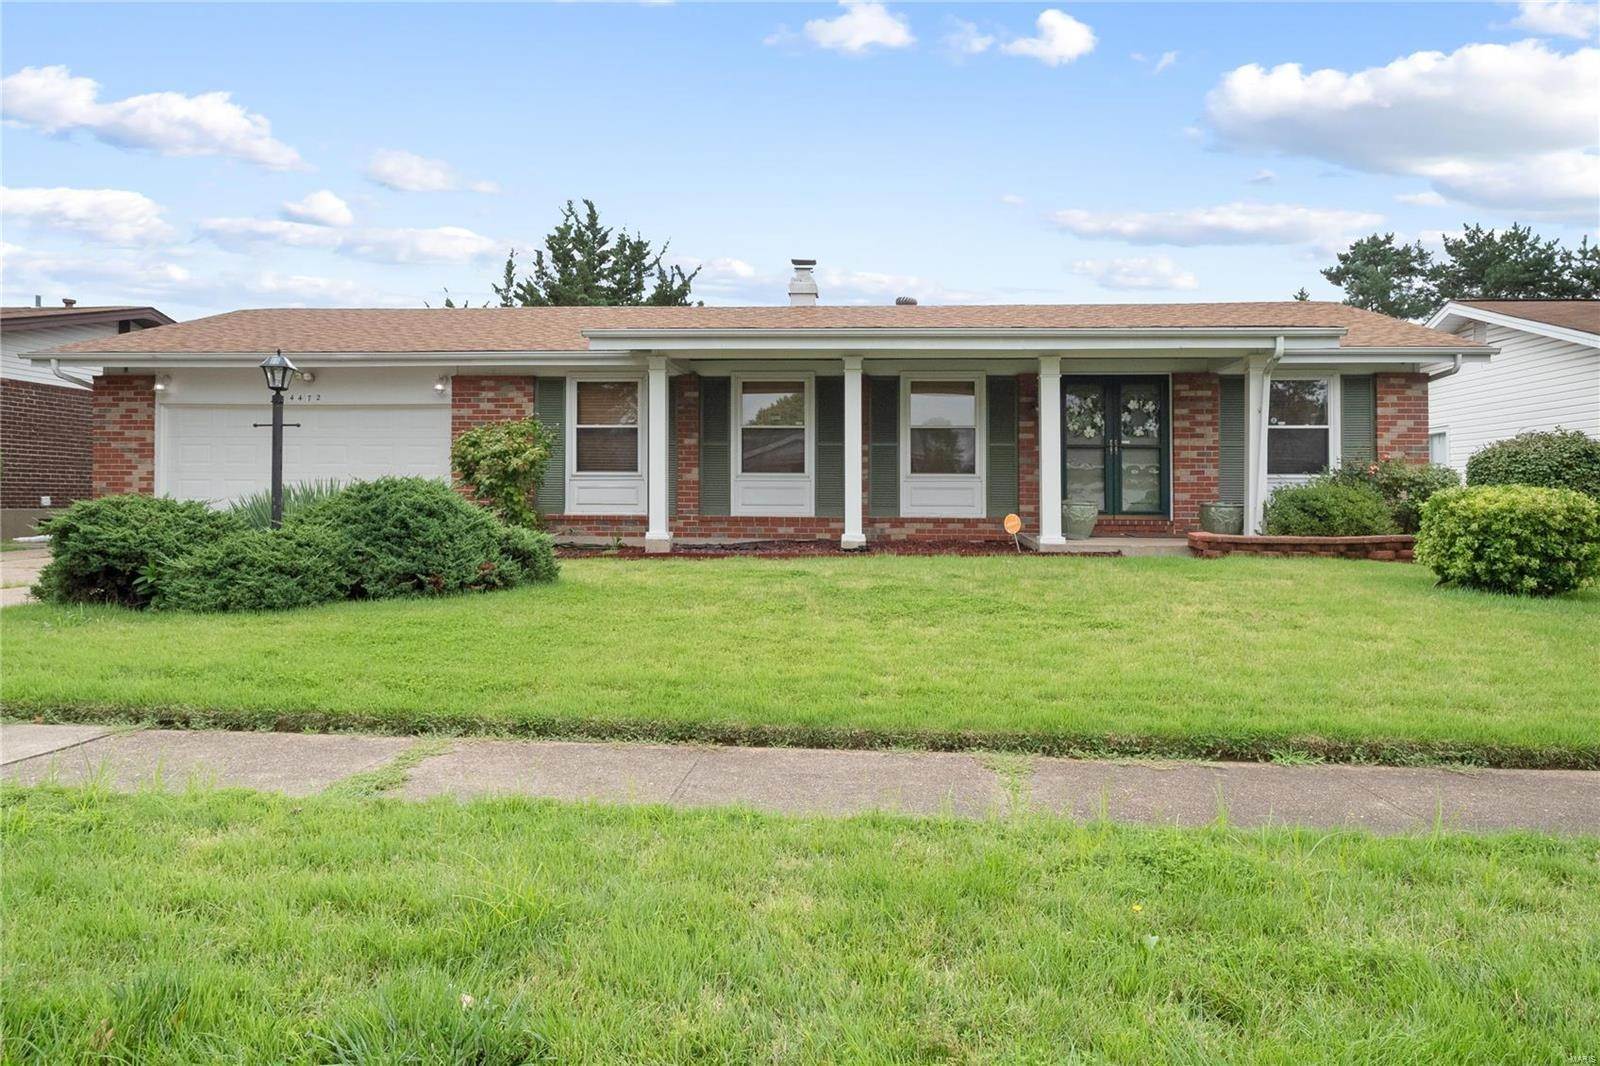 Property for Sale at 4472 Caracalla Drive Florissant, Missouri 63033 United States